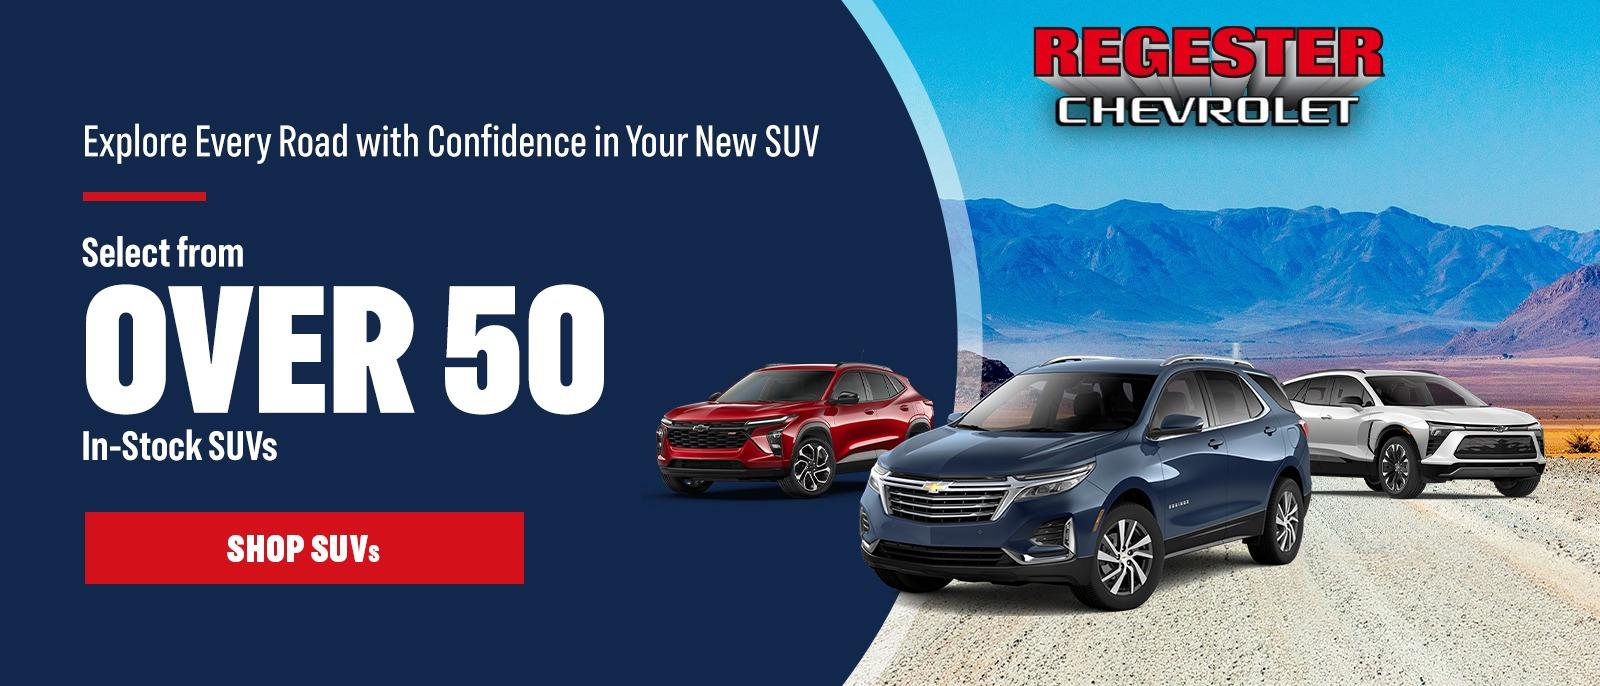 Choose from over 40 New SUVs at Regester Chevrolet